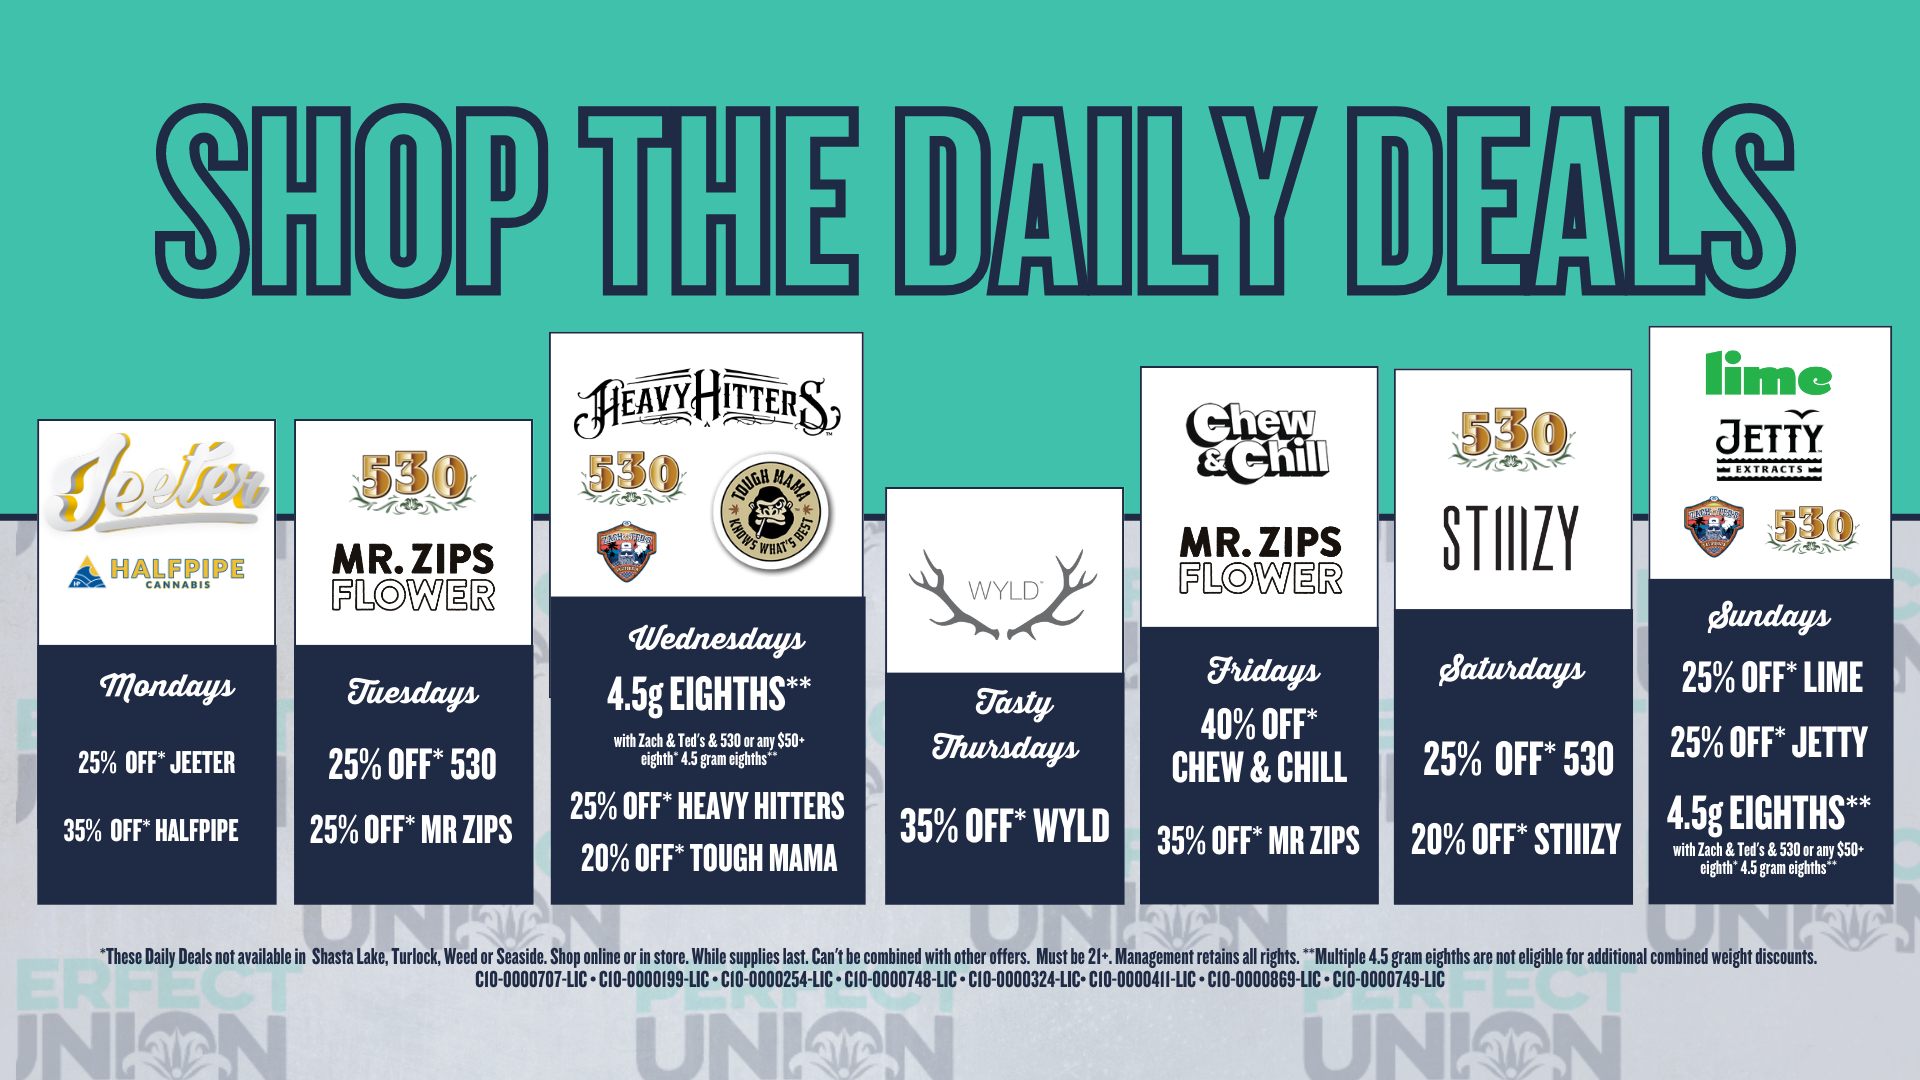 Daily deals 3.2023 Perfect Union March, deals may vary by location